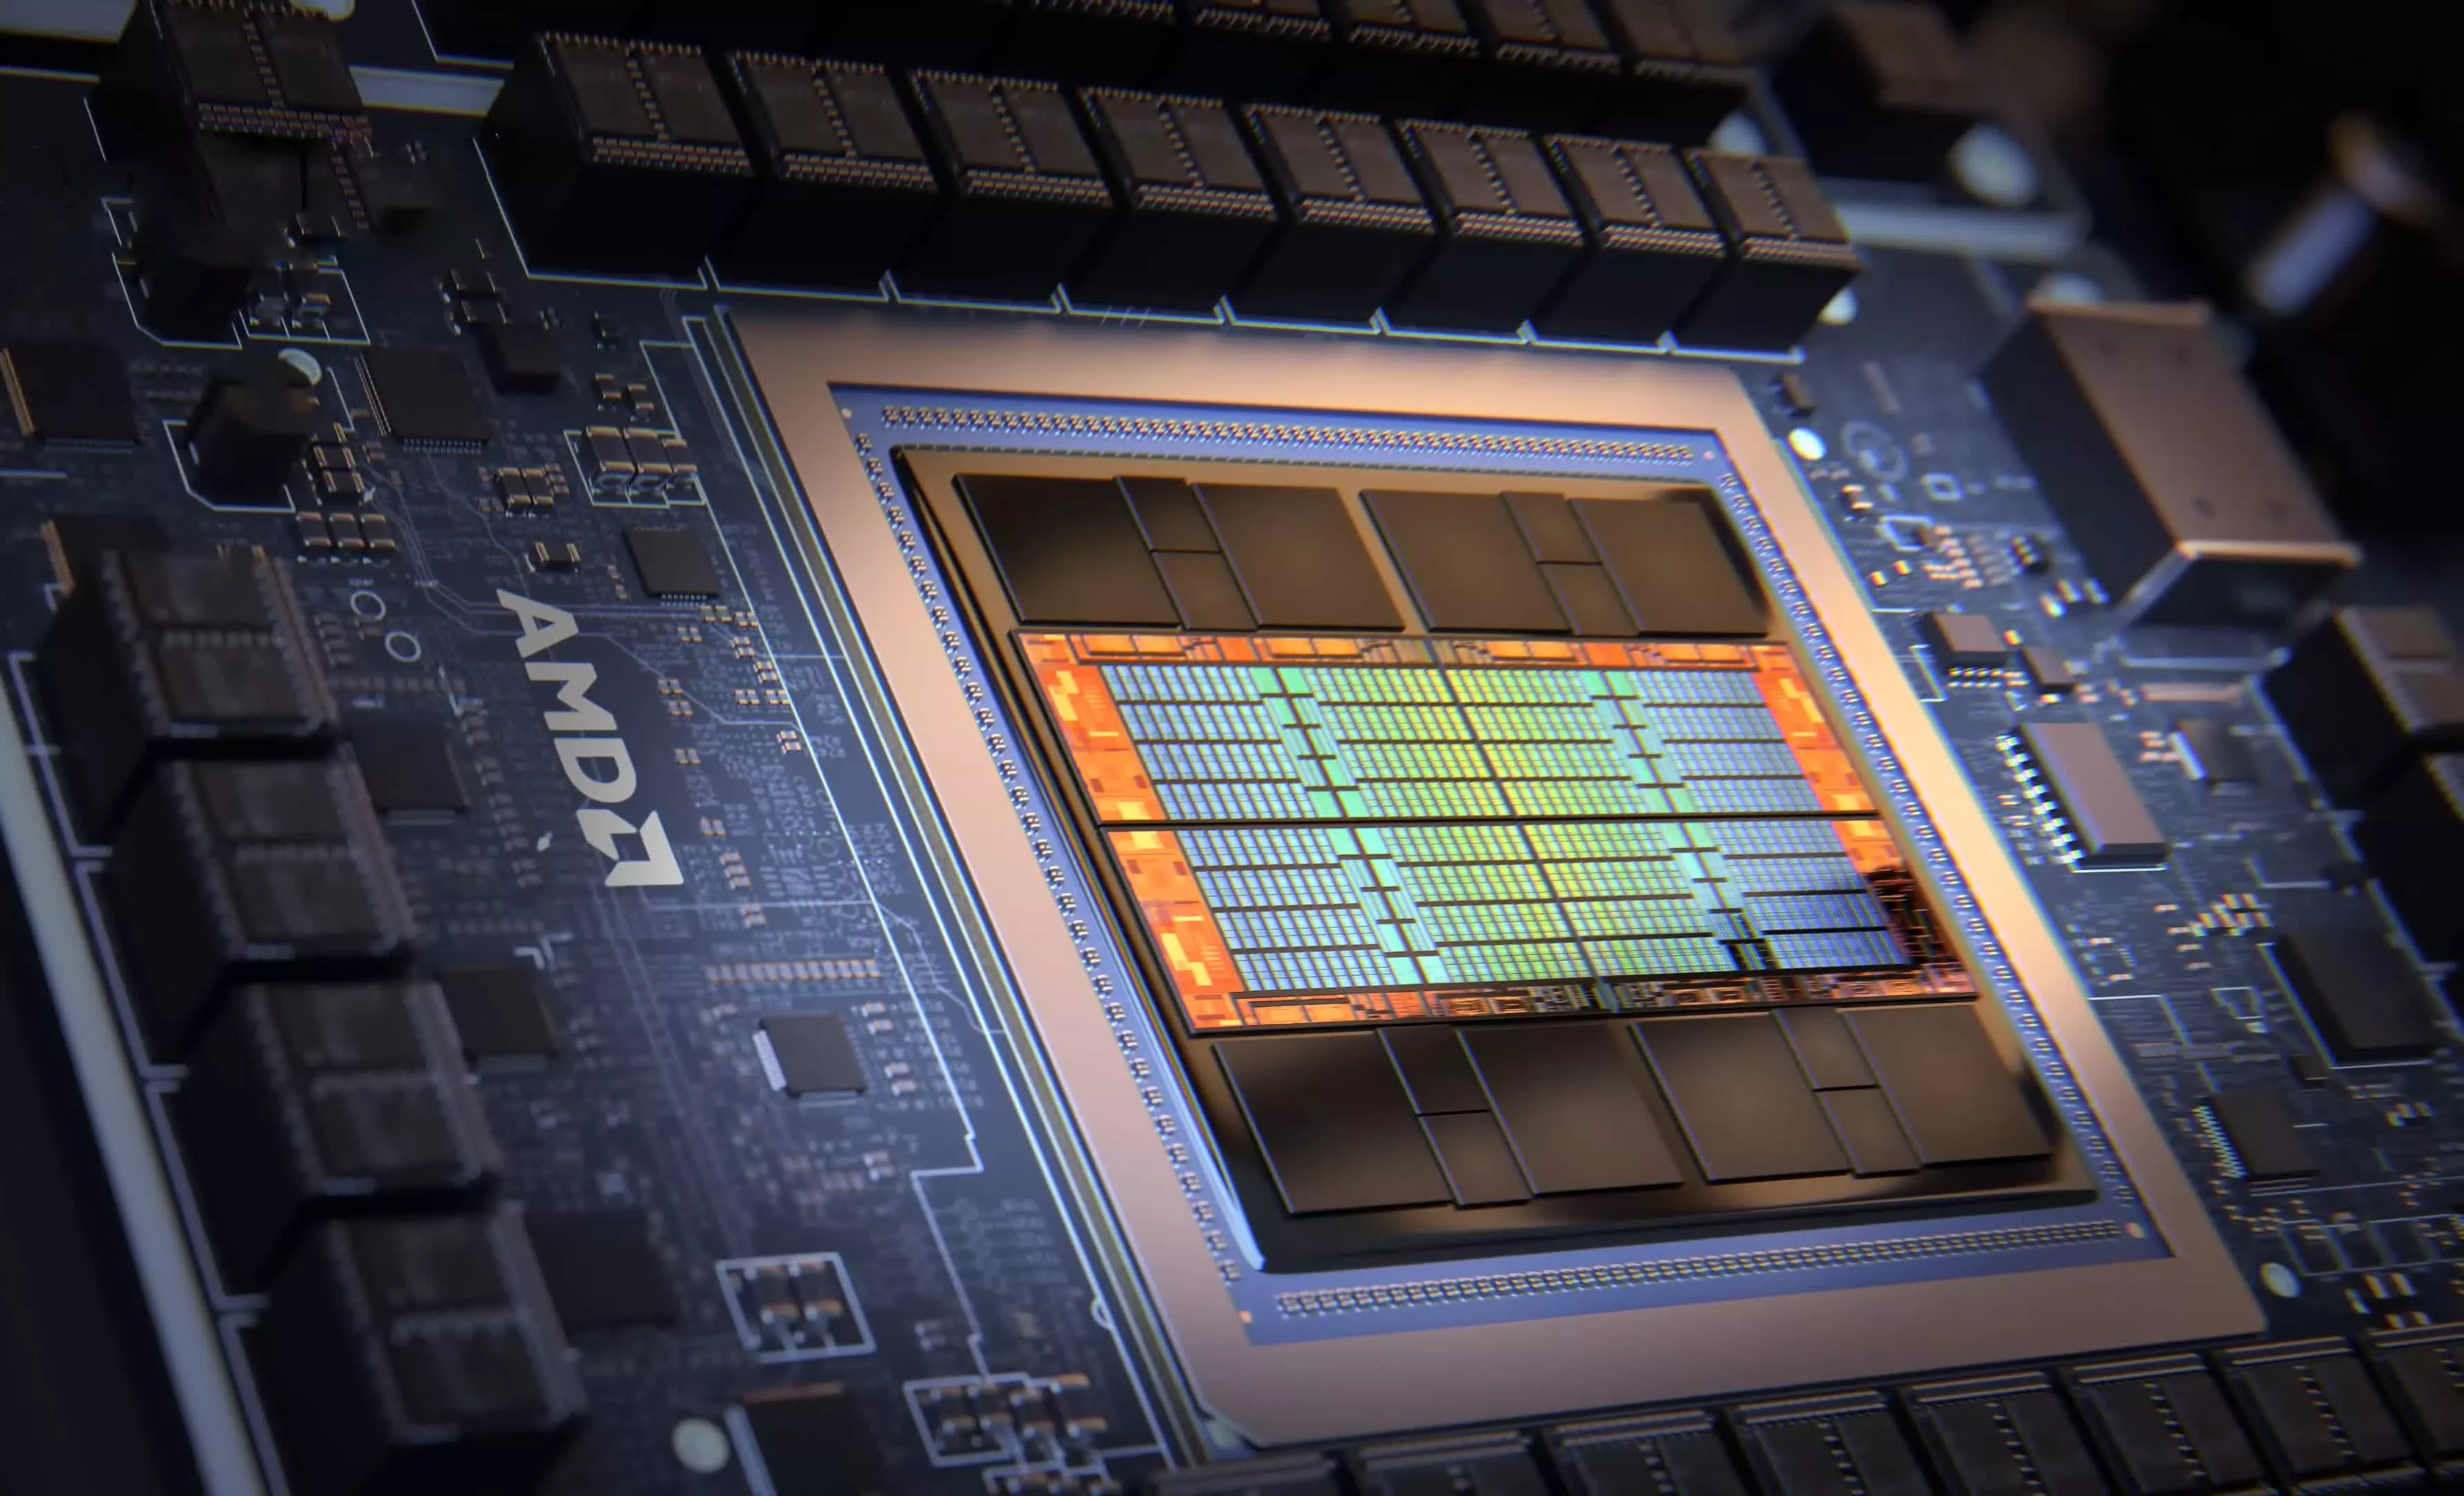 As long as AMD can offer better GPUs than Intel, and better CPUs than Nvidia, they can have a seat at the table